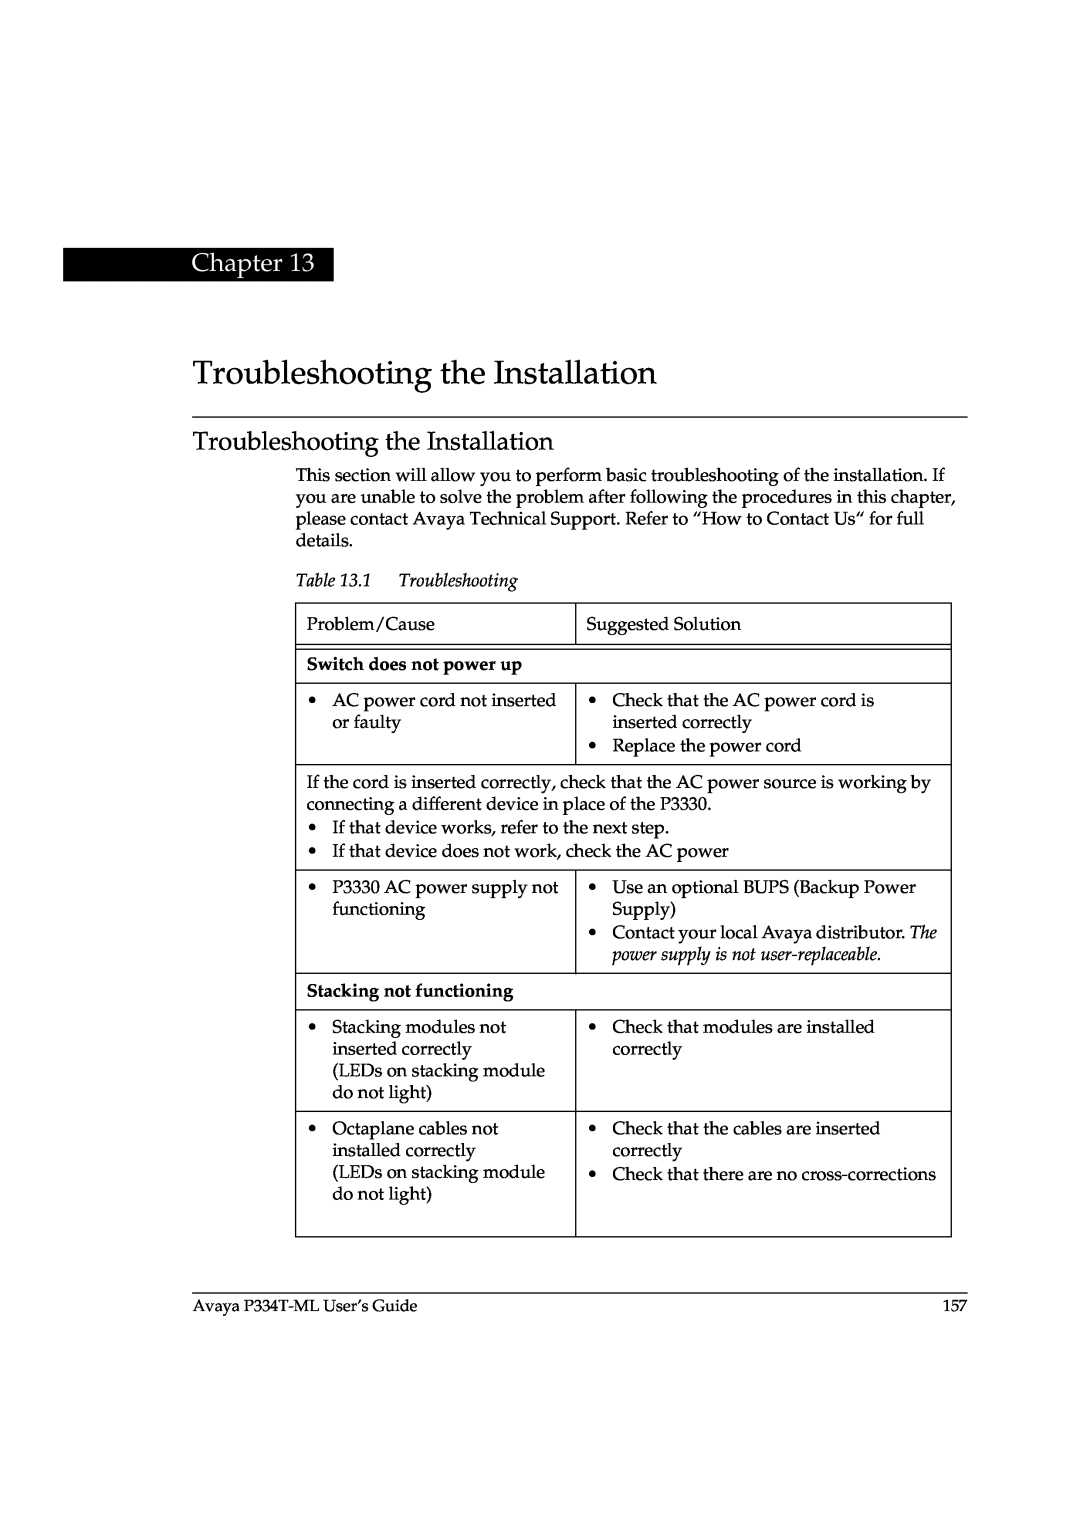 Avaya P3343T-ML manual Troubleshooting the Installation, Chapter 